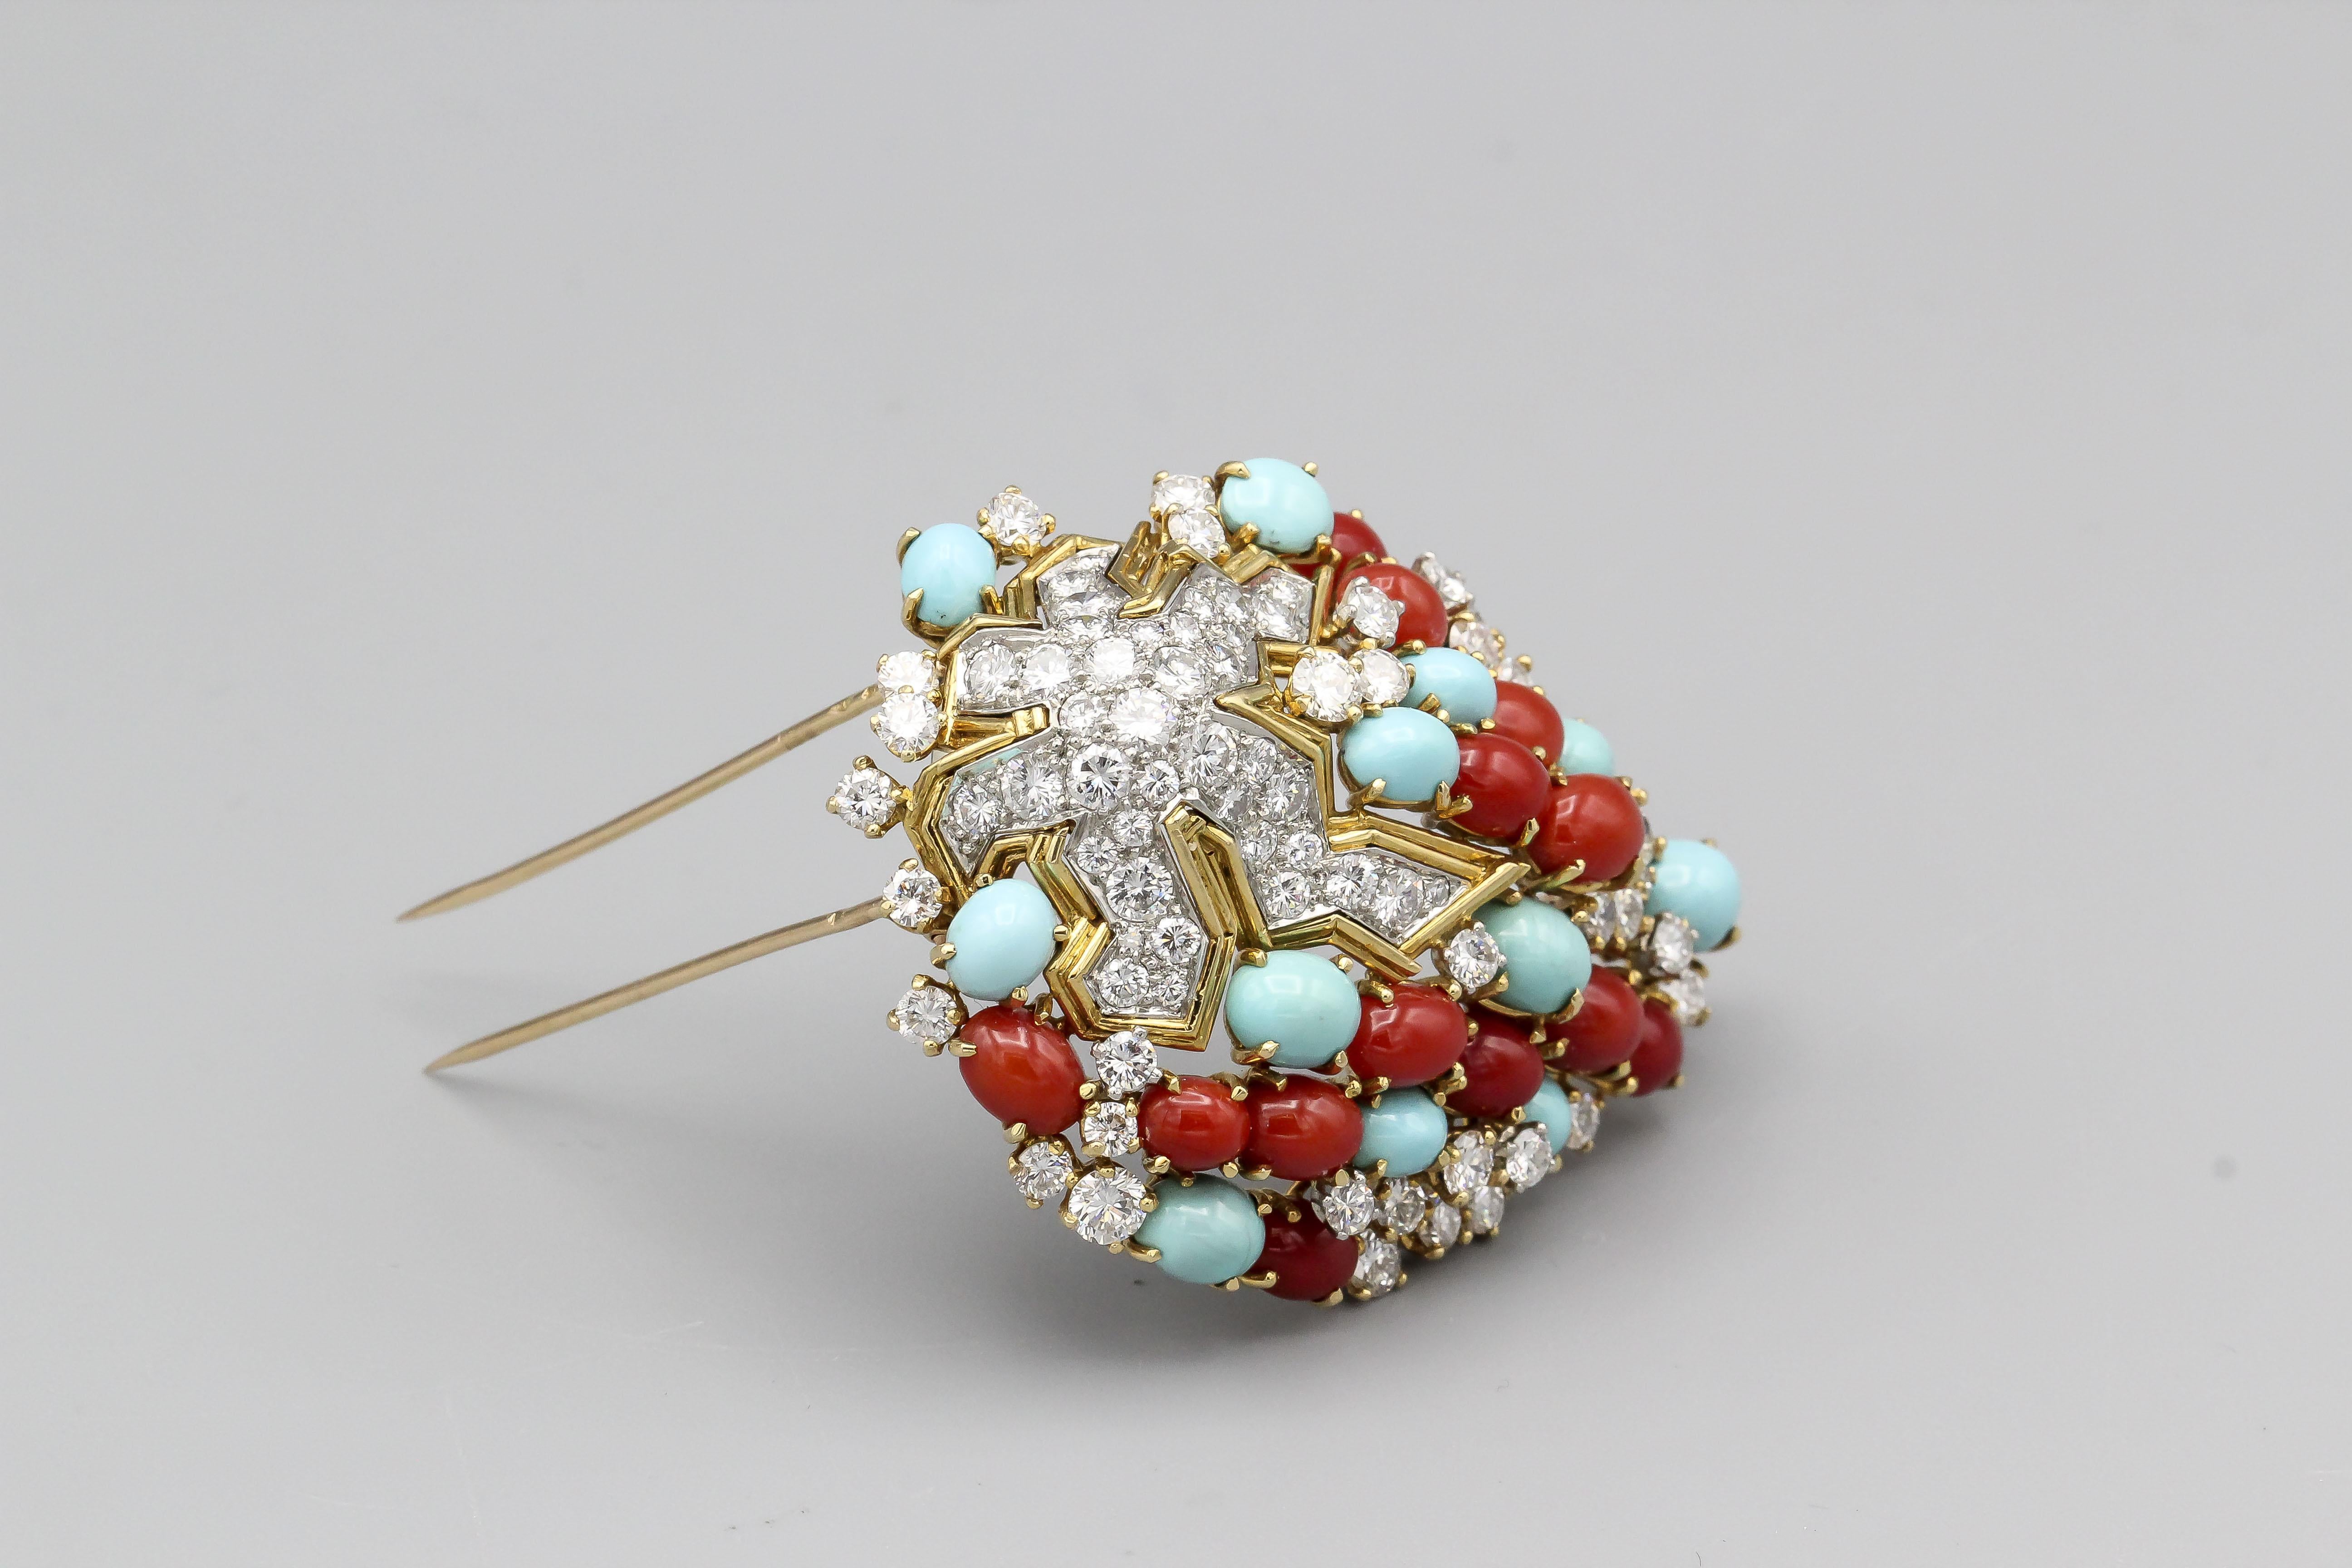 Step into the world of timeless elegance with this exquisite vintage Tiffany & Co. Schlumberger Coral Turquoise Diamond Platinum 18k Gold Brooch, a true testament to the enduring creativity and craftsmanship of renowned designer Jean Schlumberger.